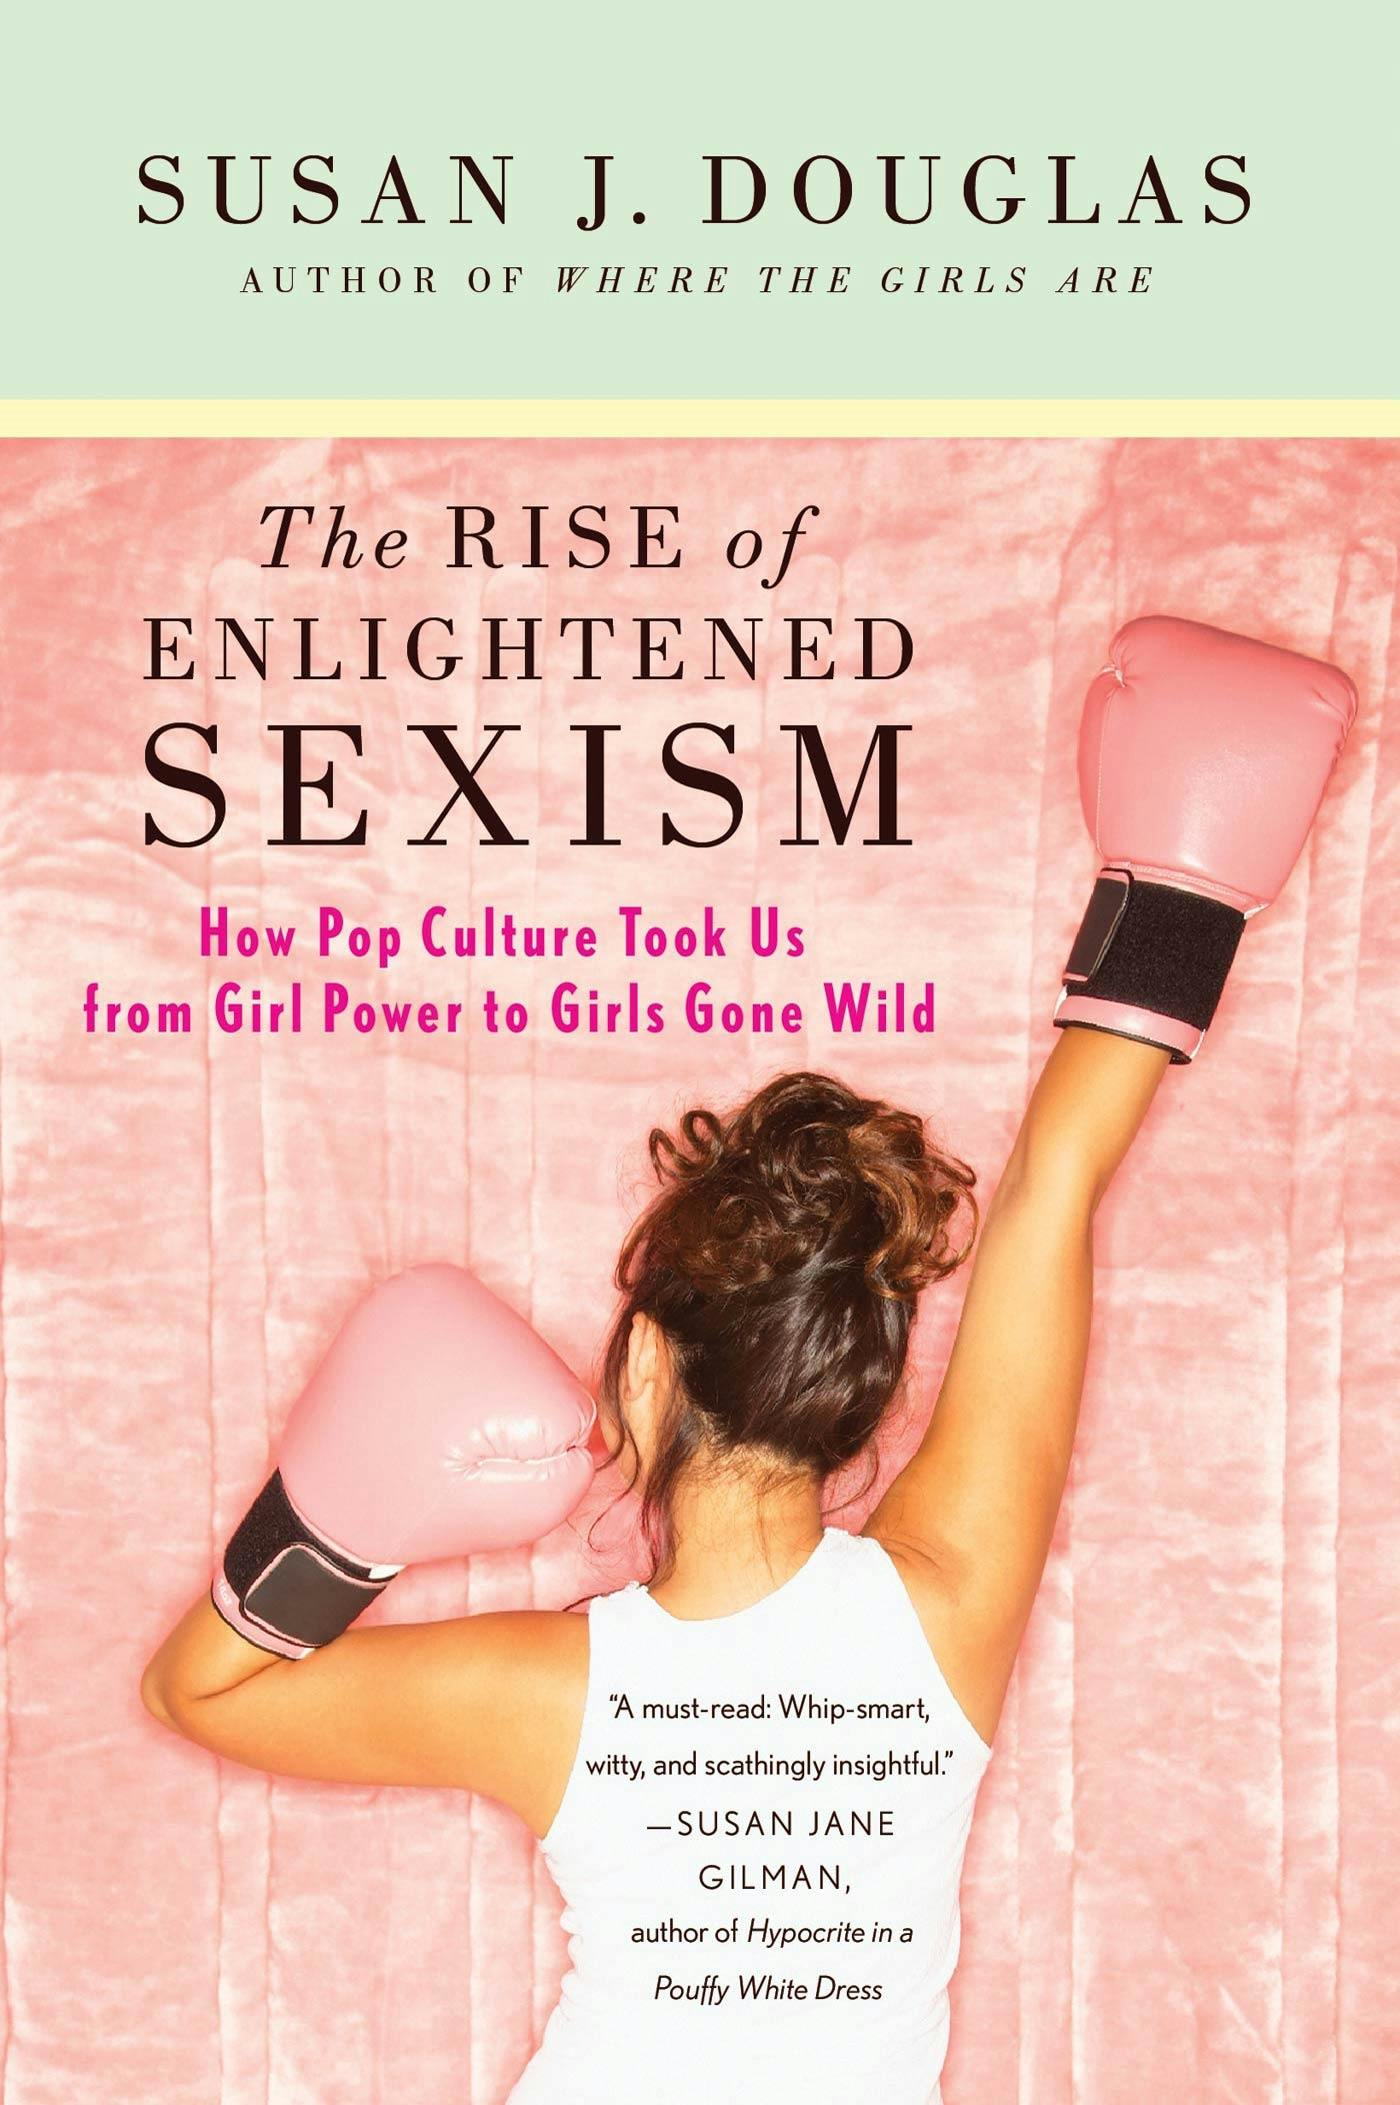 The Rise of Enlightened Sexism pic